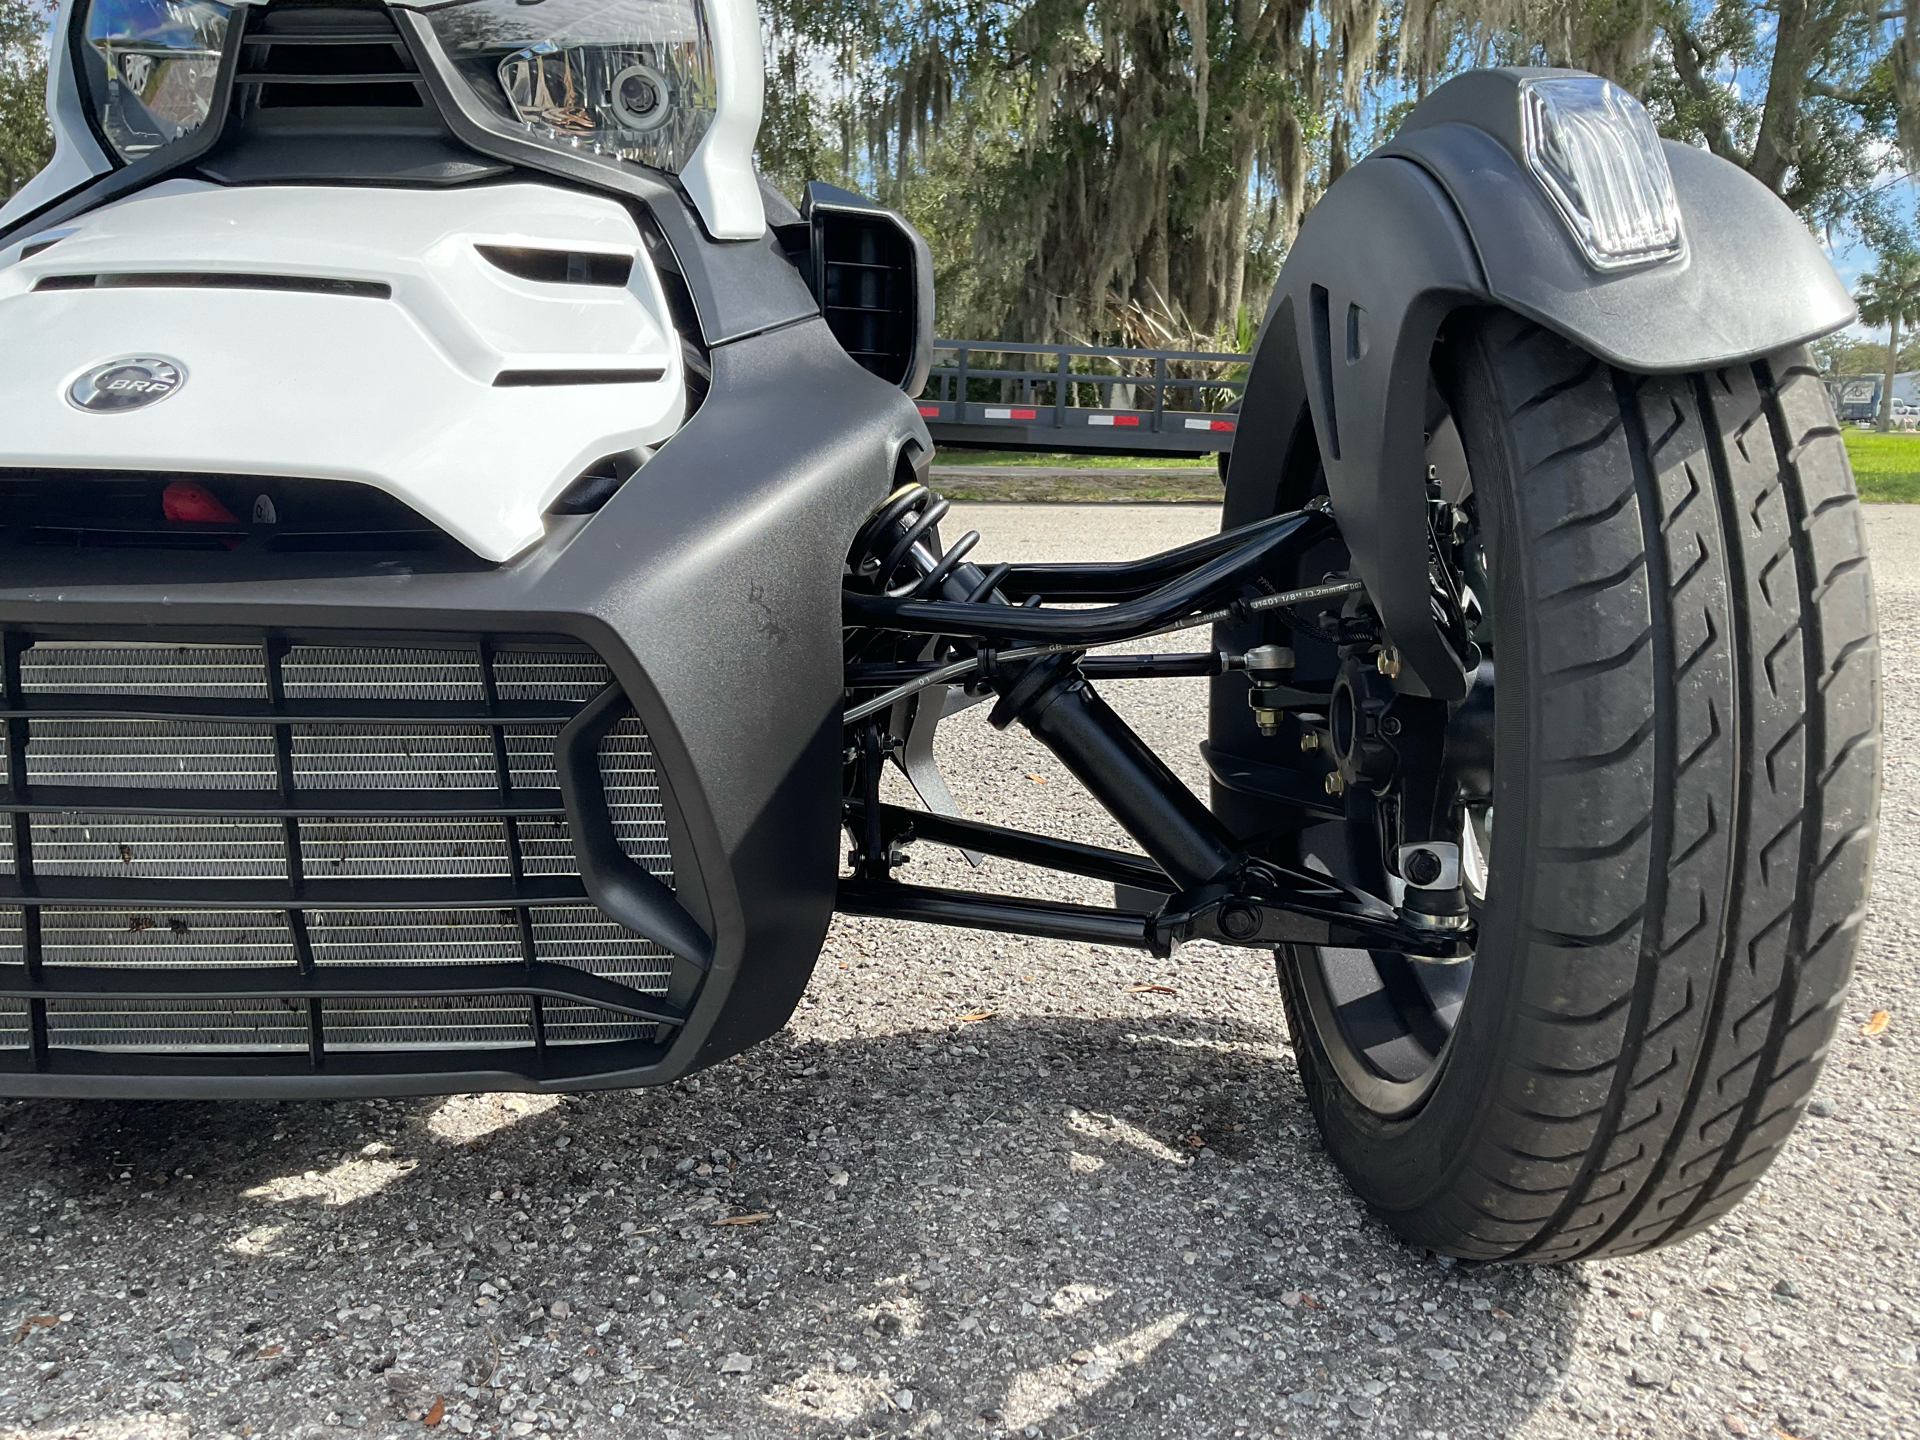 2021 Can-Am Ryker 600 ACE in Sanford, Florida - Photo 16